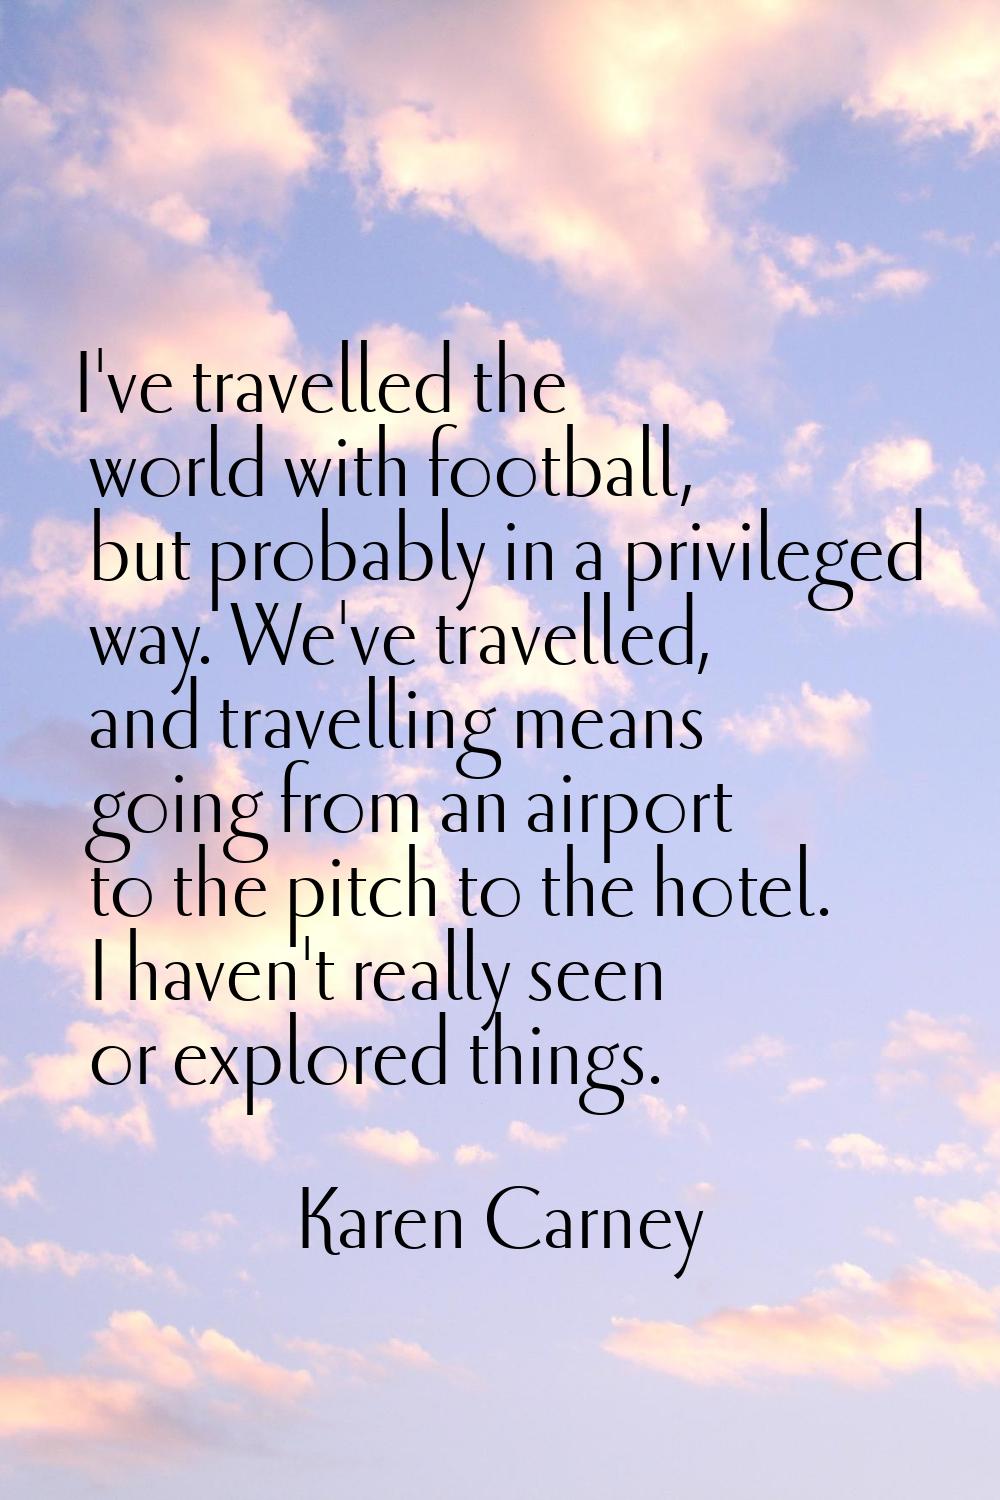 I've travelled the world with football, but probably in a privileged way. We've travelled, and trav